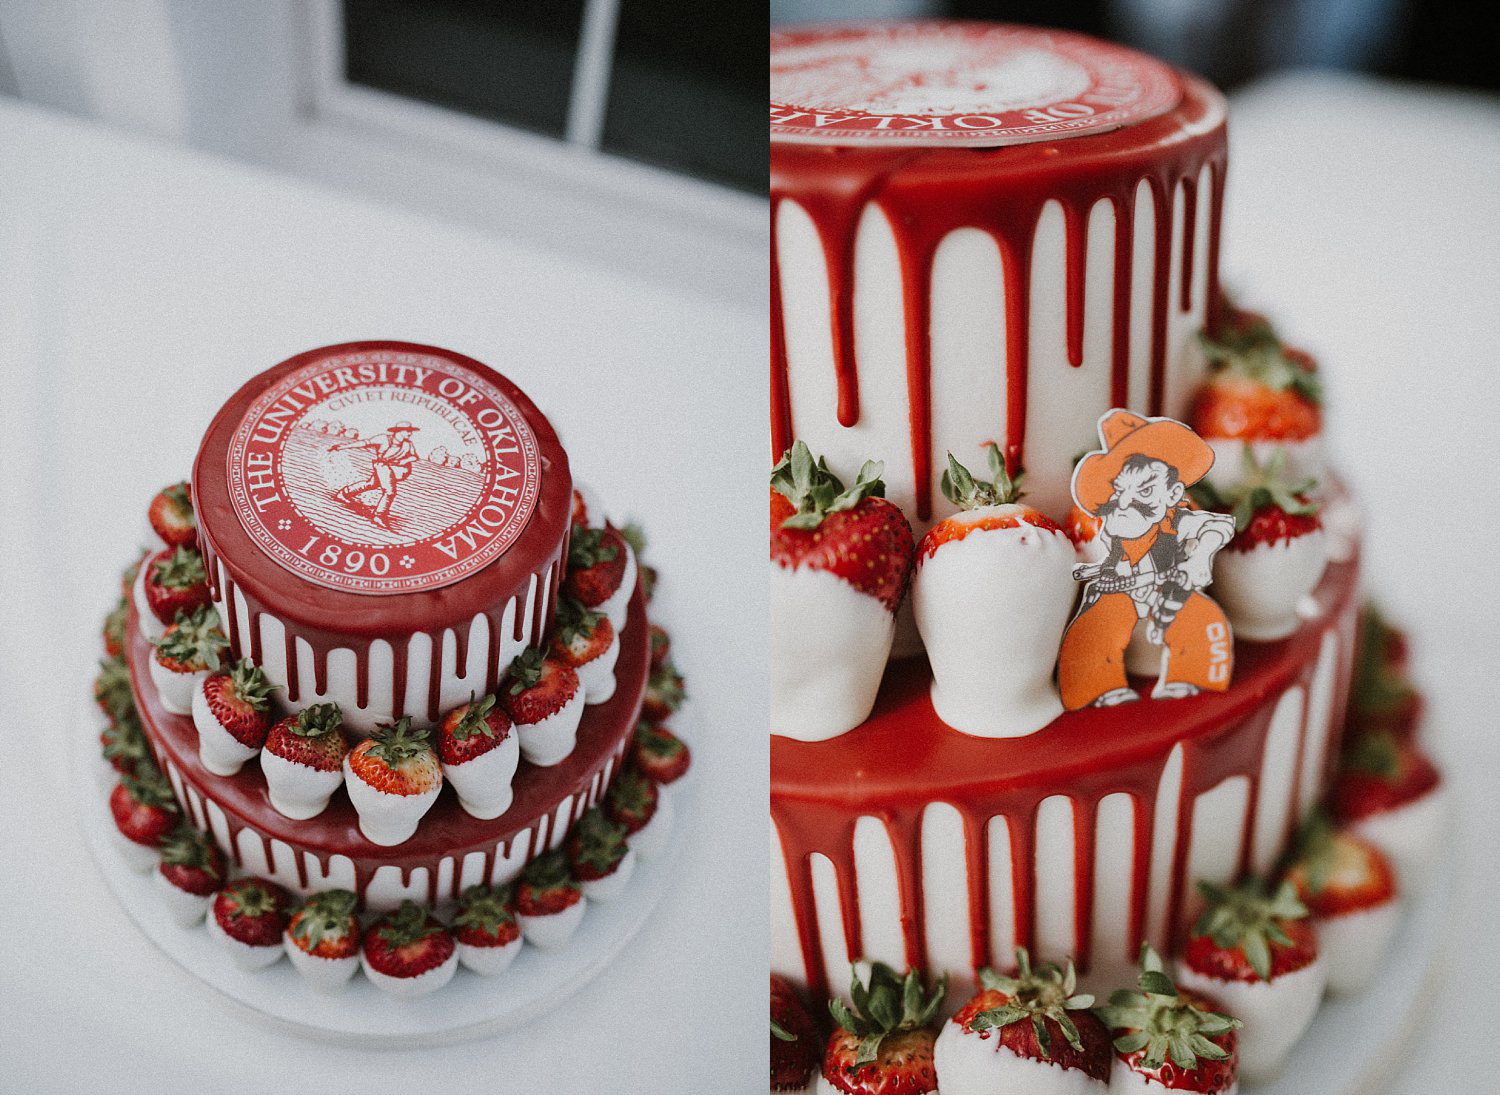 University of Oklahoma groom's cake with white chocolate and red drip with hidden cowboy